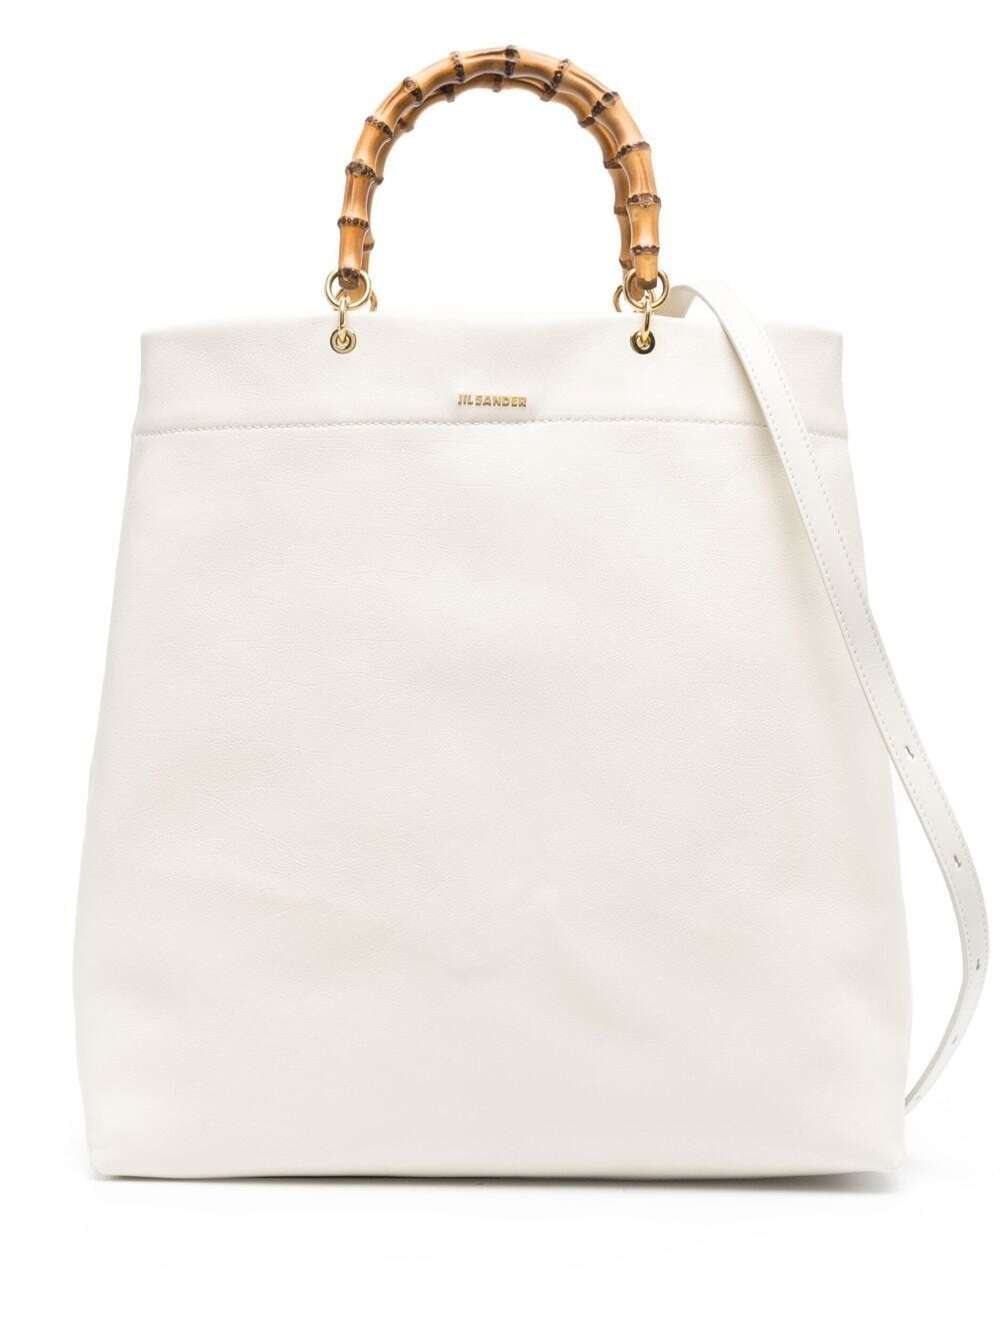 Jil Sander Bamboo Tote Leather Shopper Bag With Bamboo Handles And Printed  Logo On The Front In White